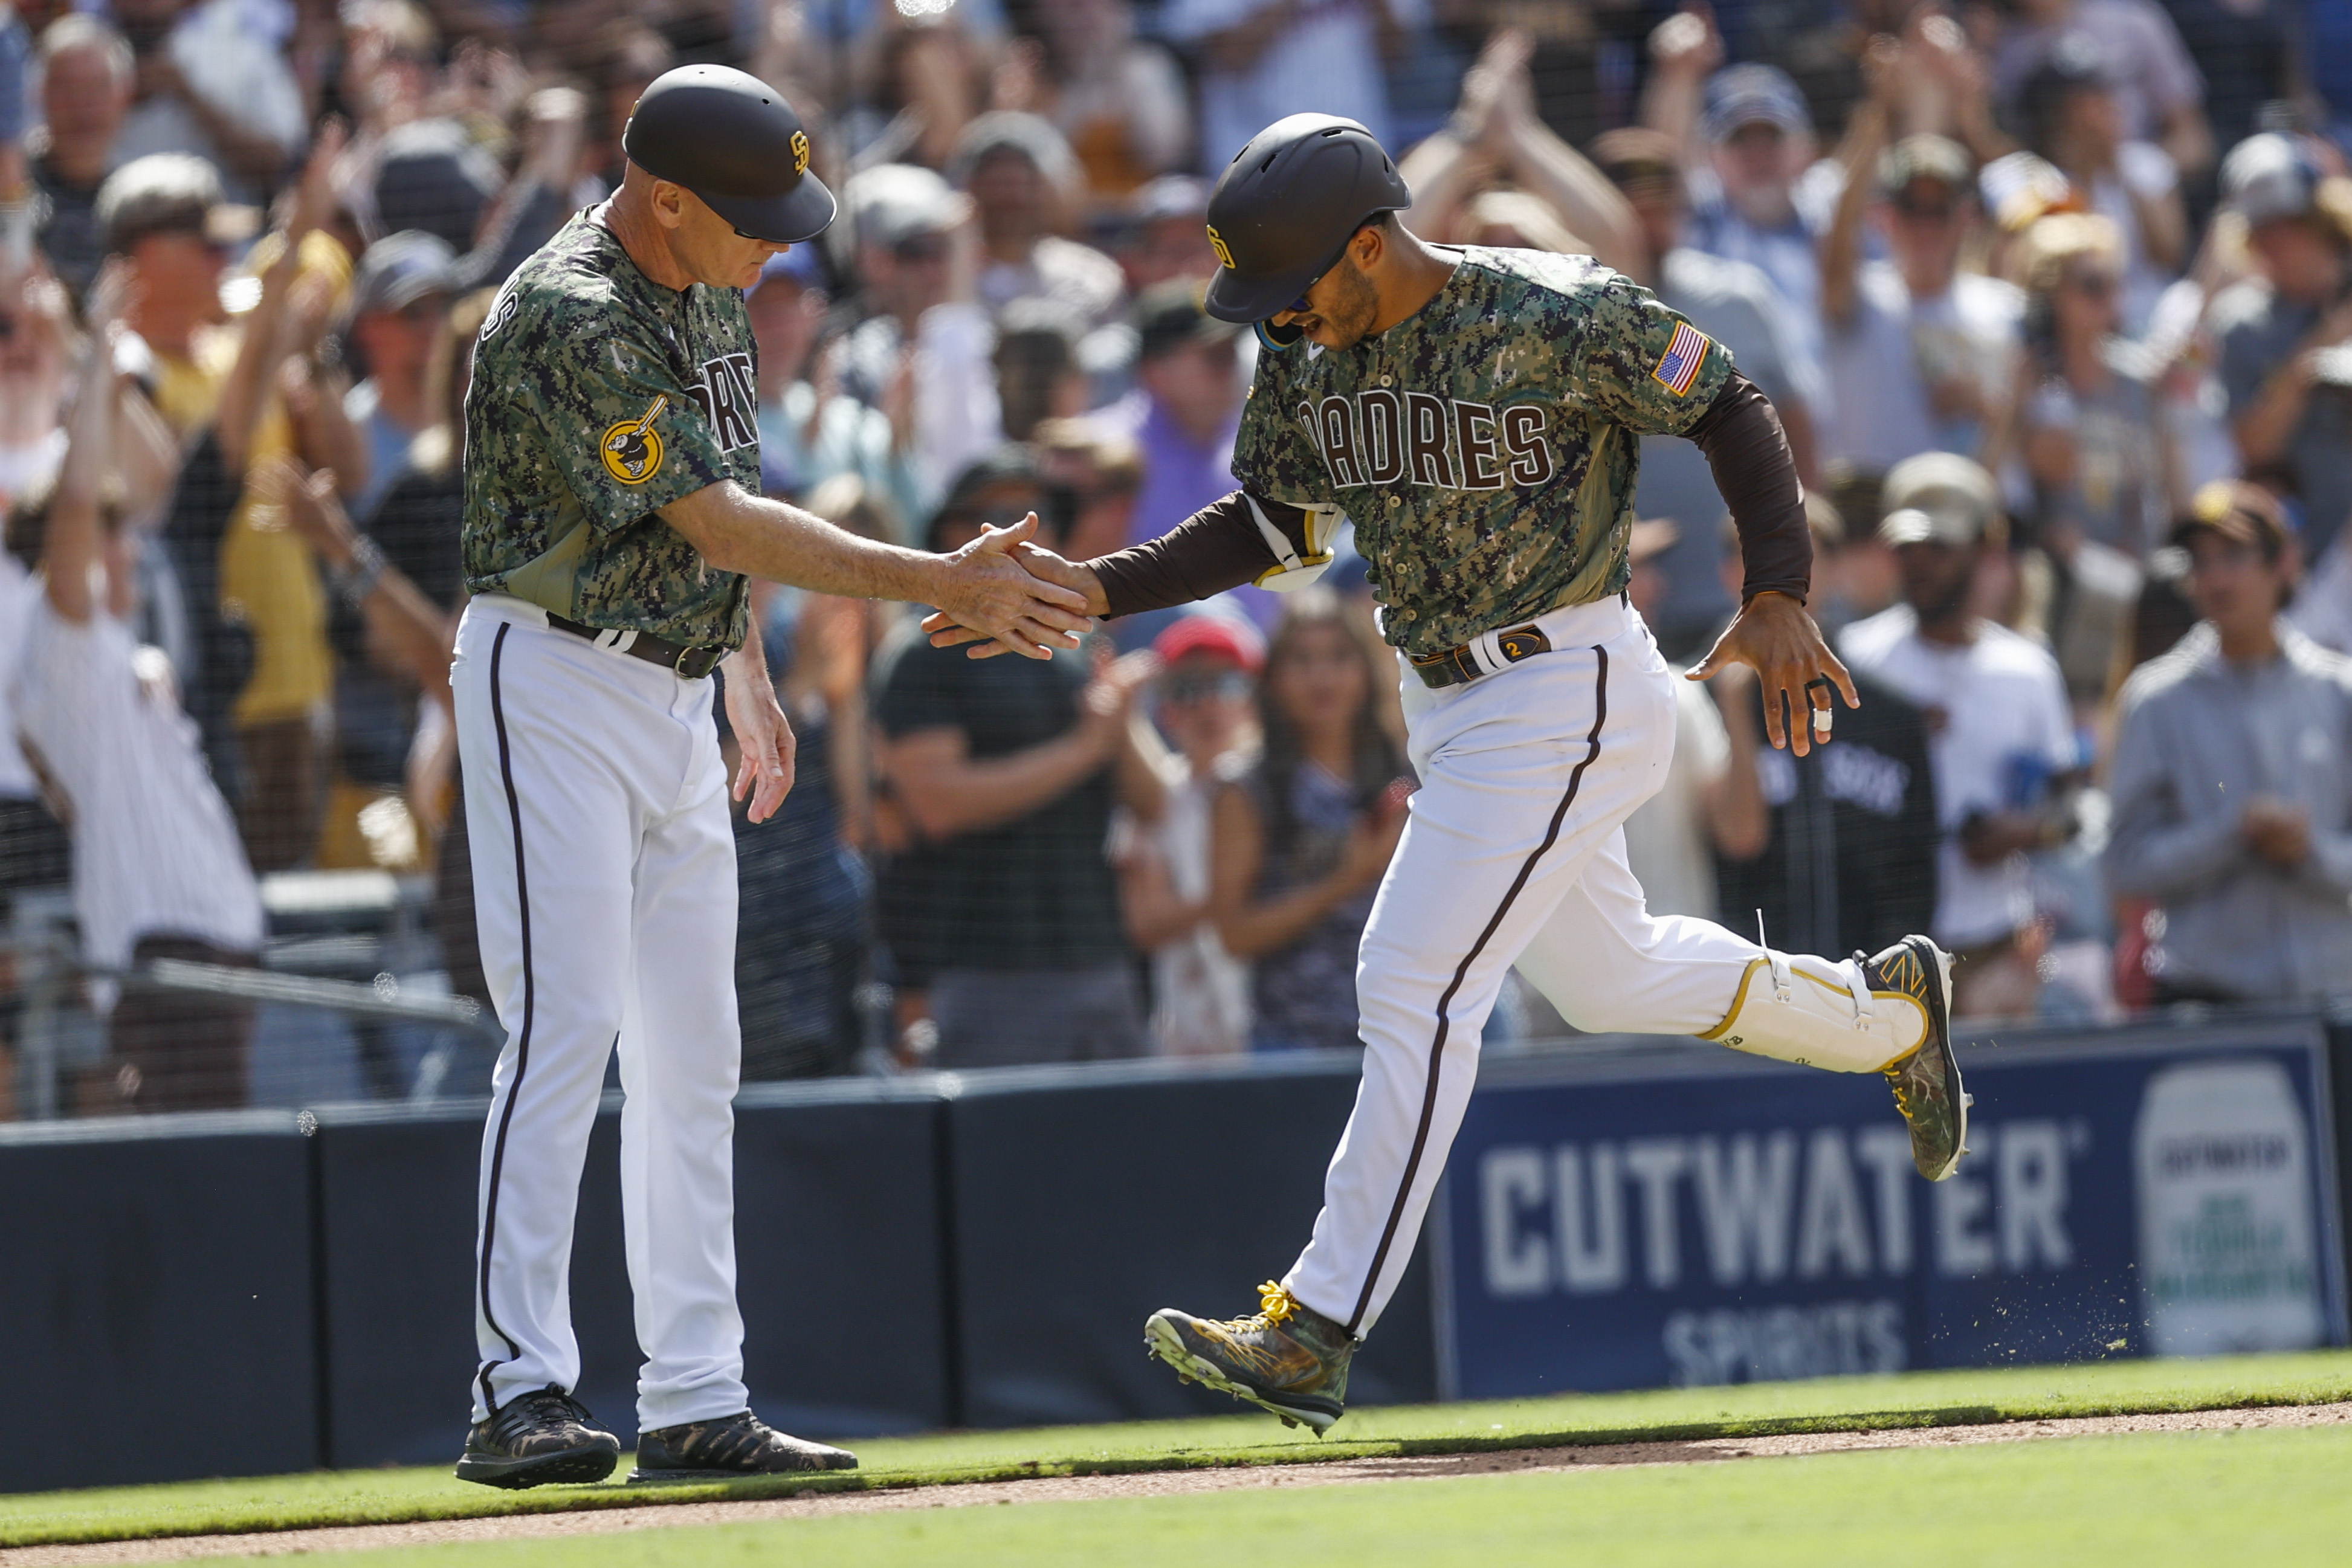 Juan Soto hits 2 long home runs in the Padres' 5-4 victory over the Tigers